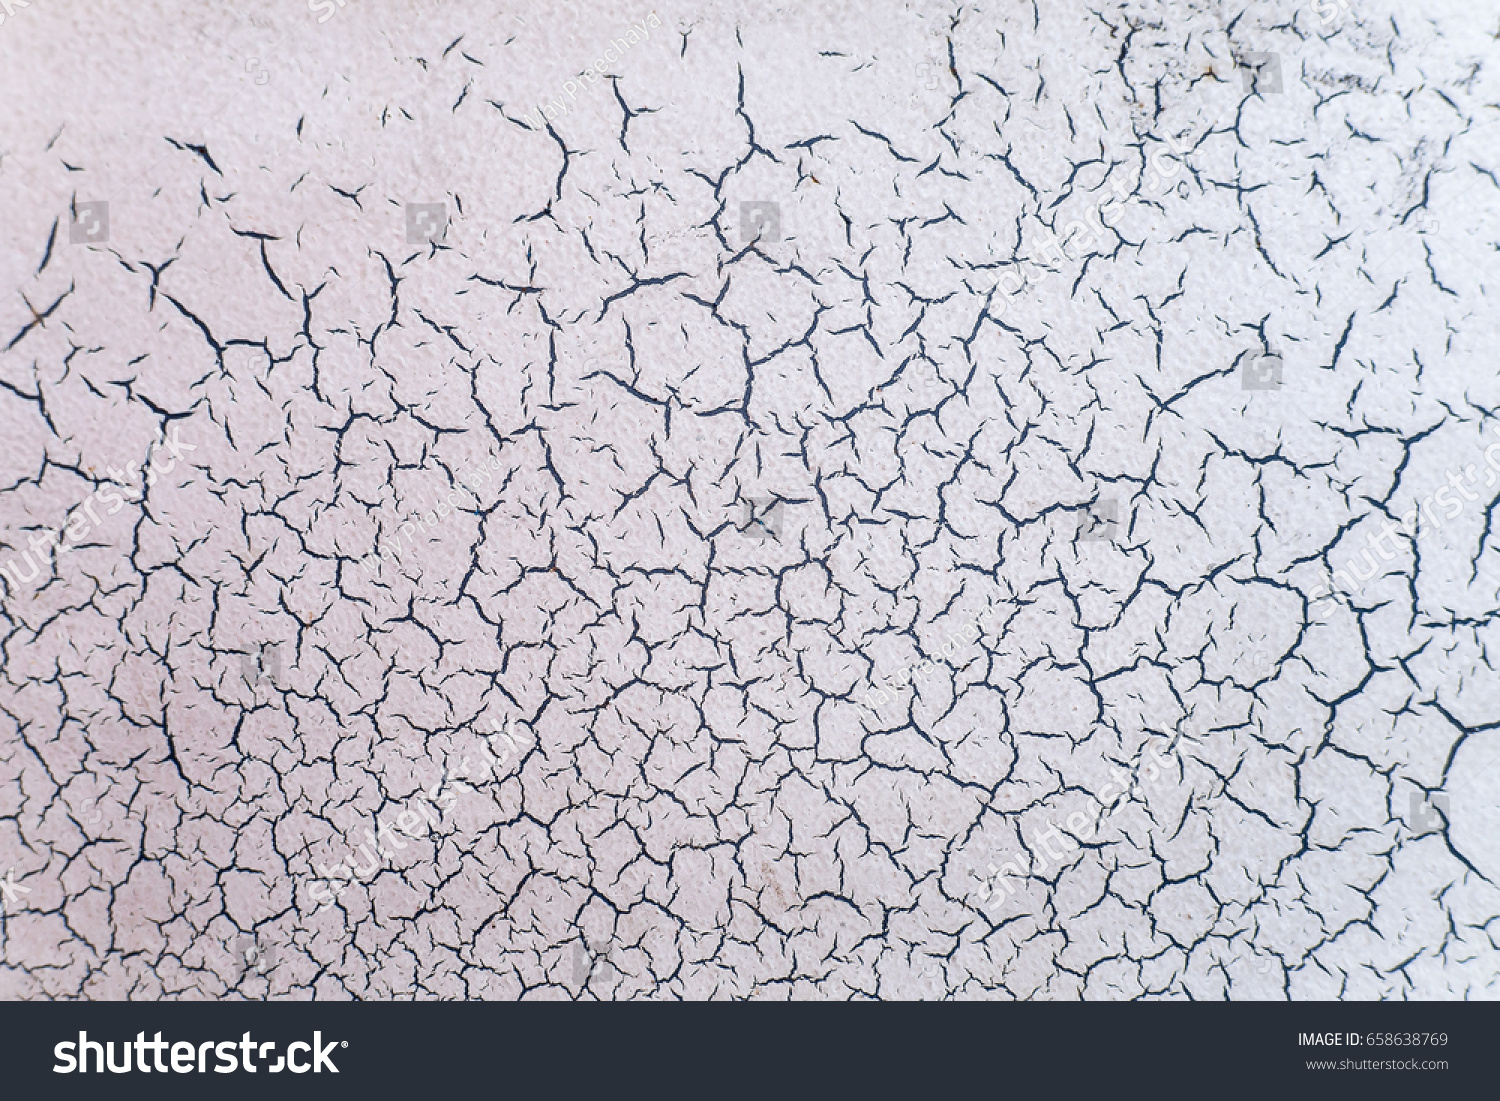 Cracked and peeling paint texture background. Close-up of old dirty white wall cracking.  #658638769